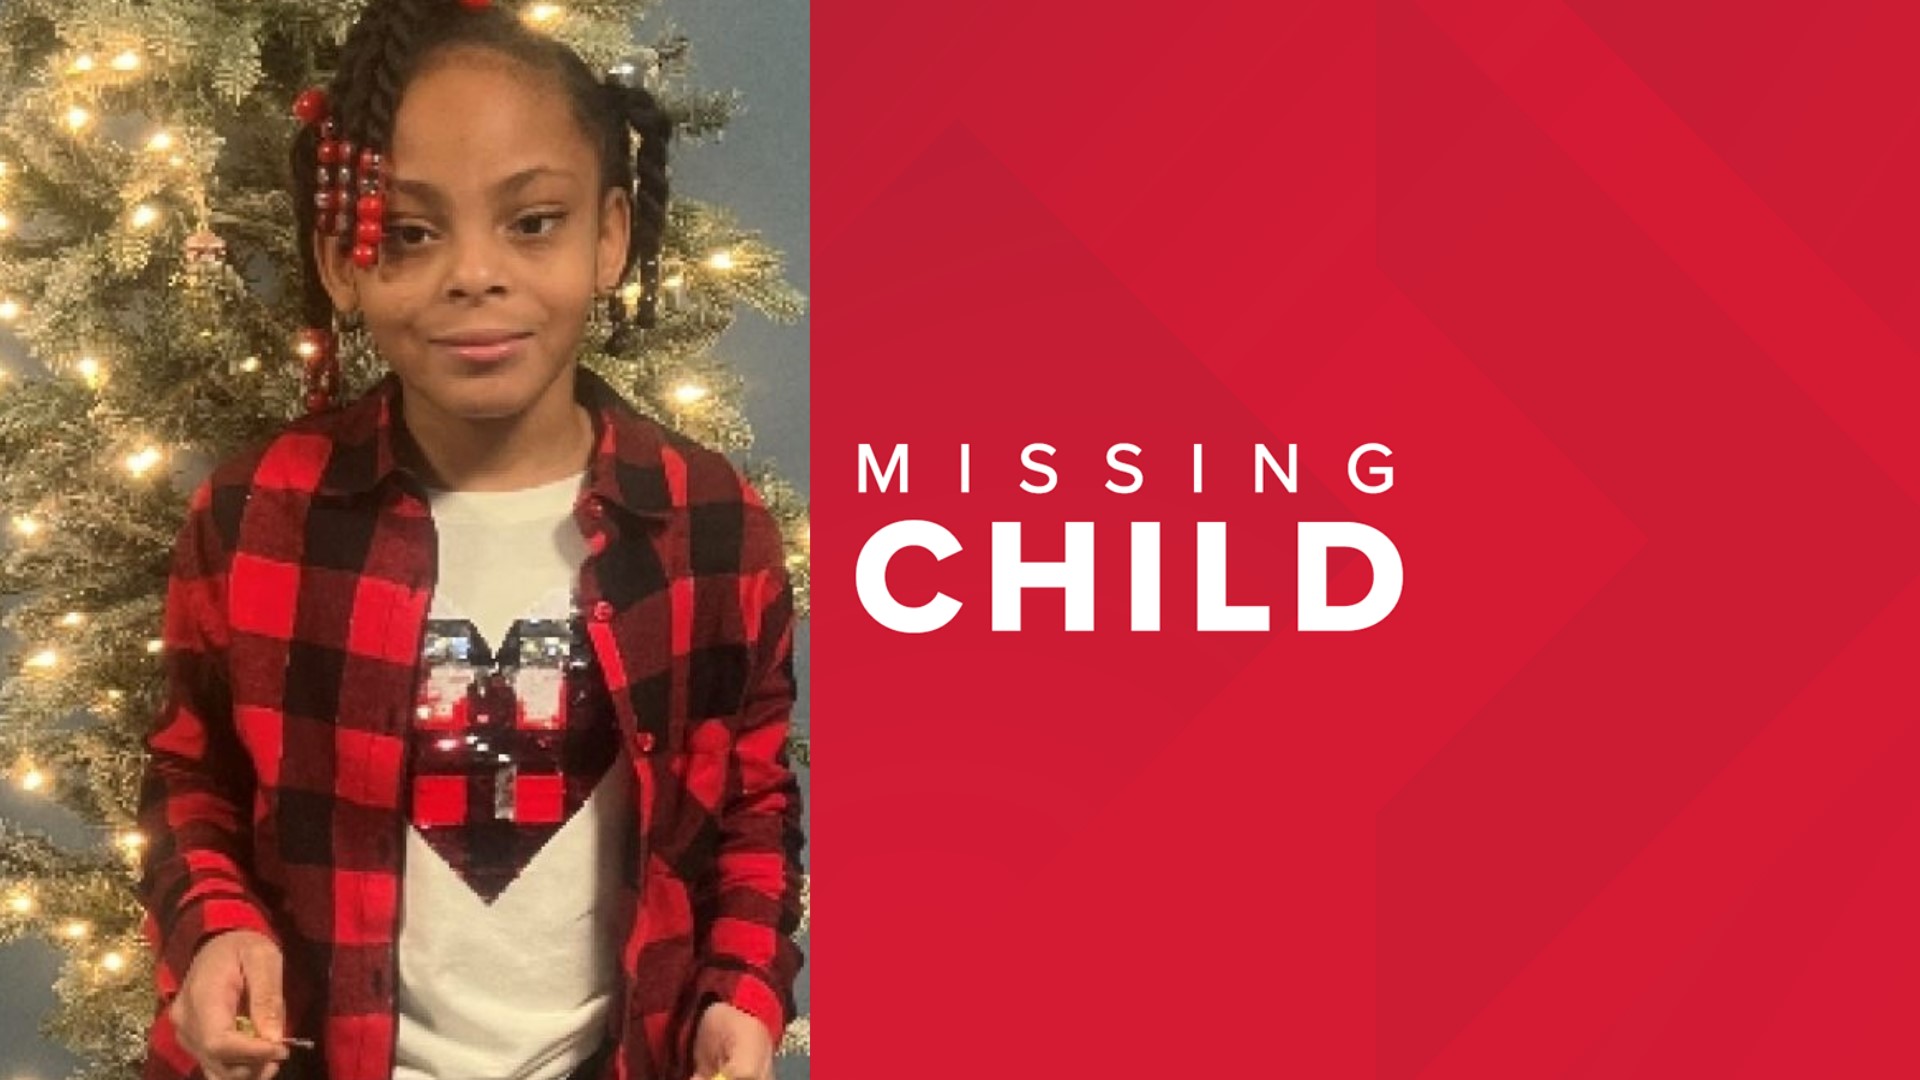 Police: 8-year-old girl reported missing from east Columbus